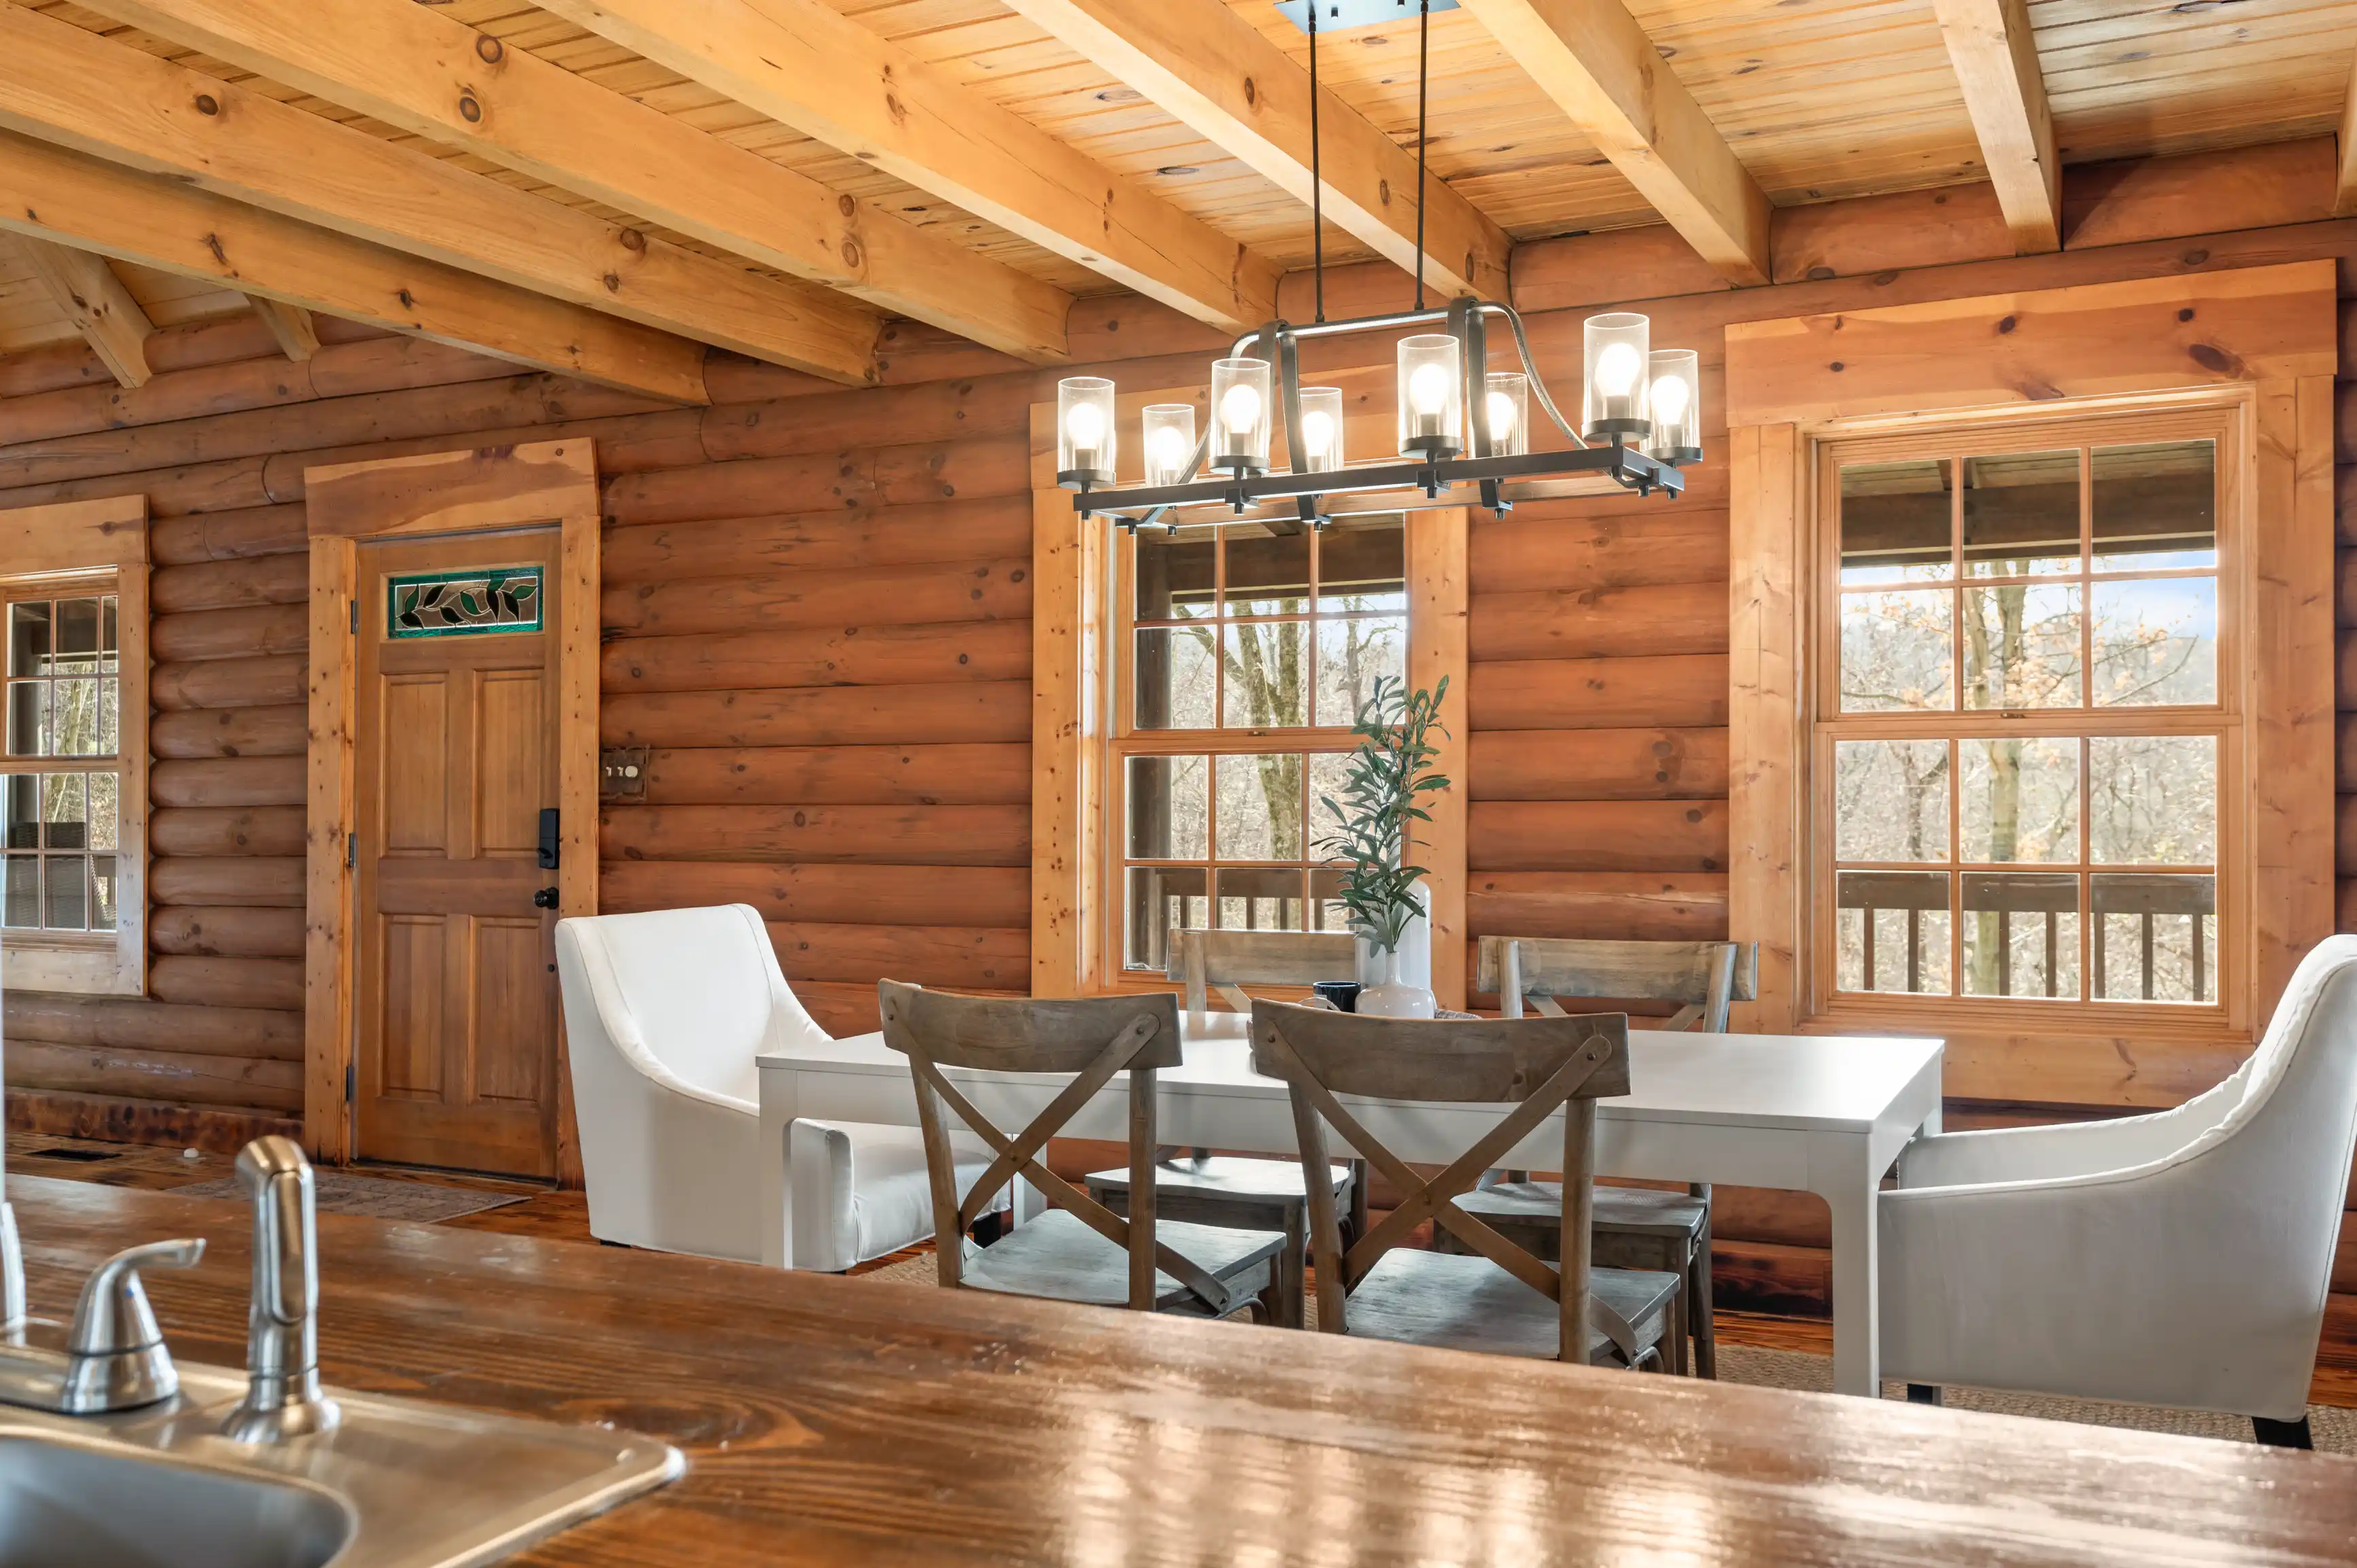 Rustic cabin interior with log walls, exposed wooden beams, and a dining area with modern chairs under a contemporary chandelier.